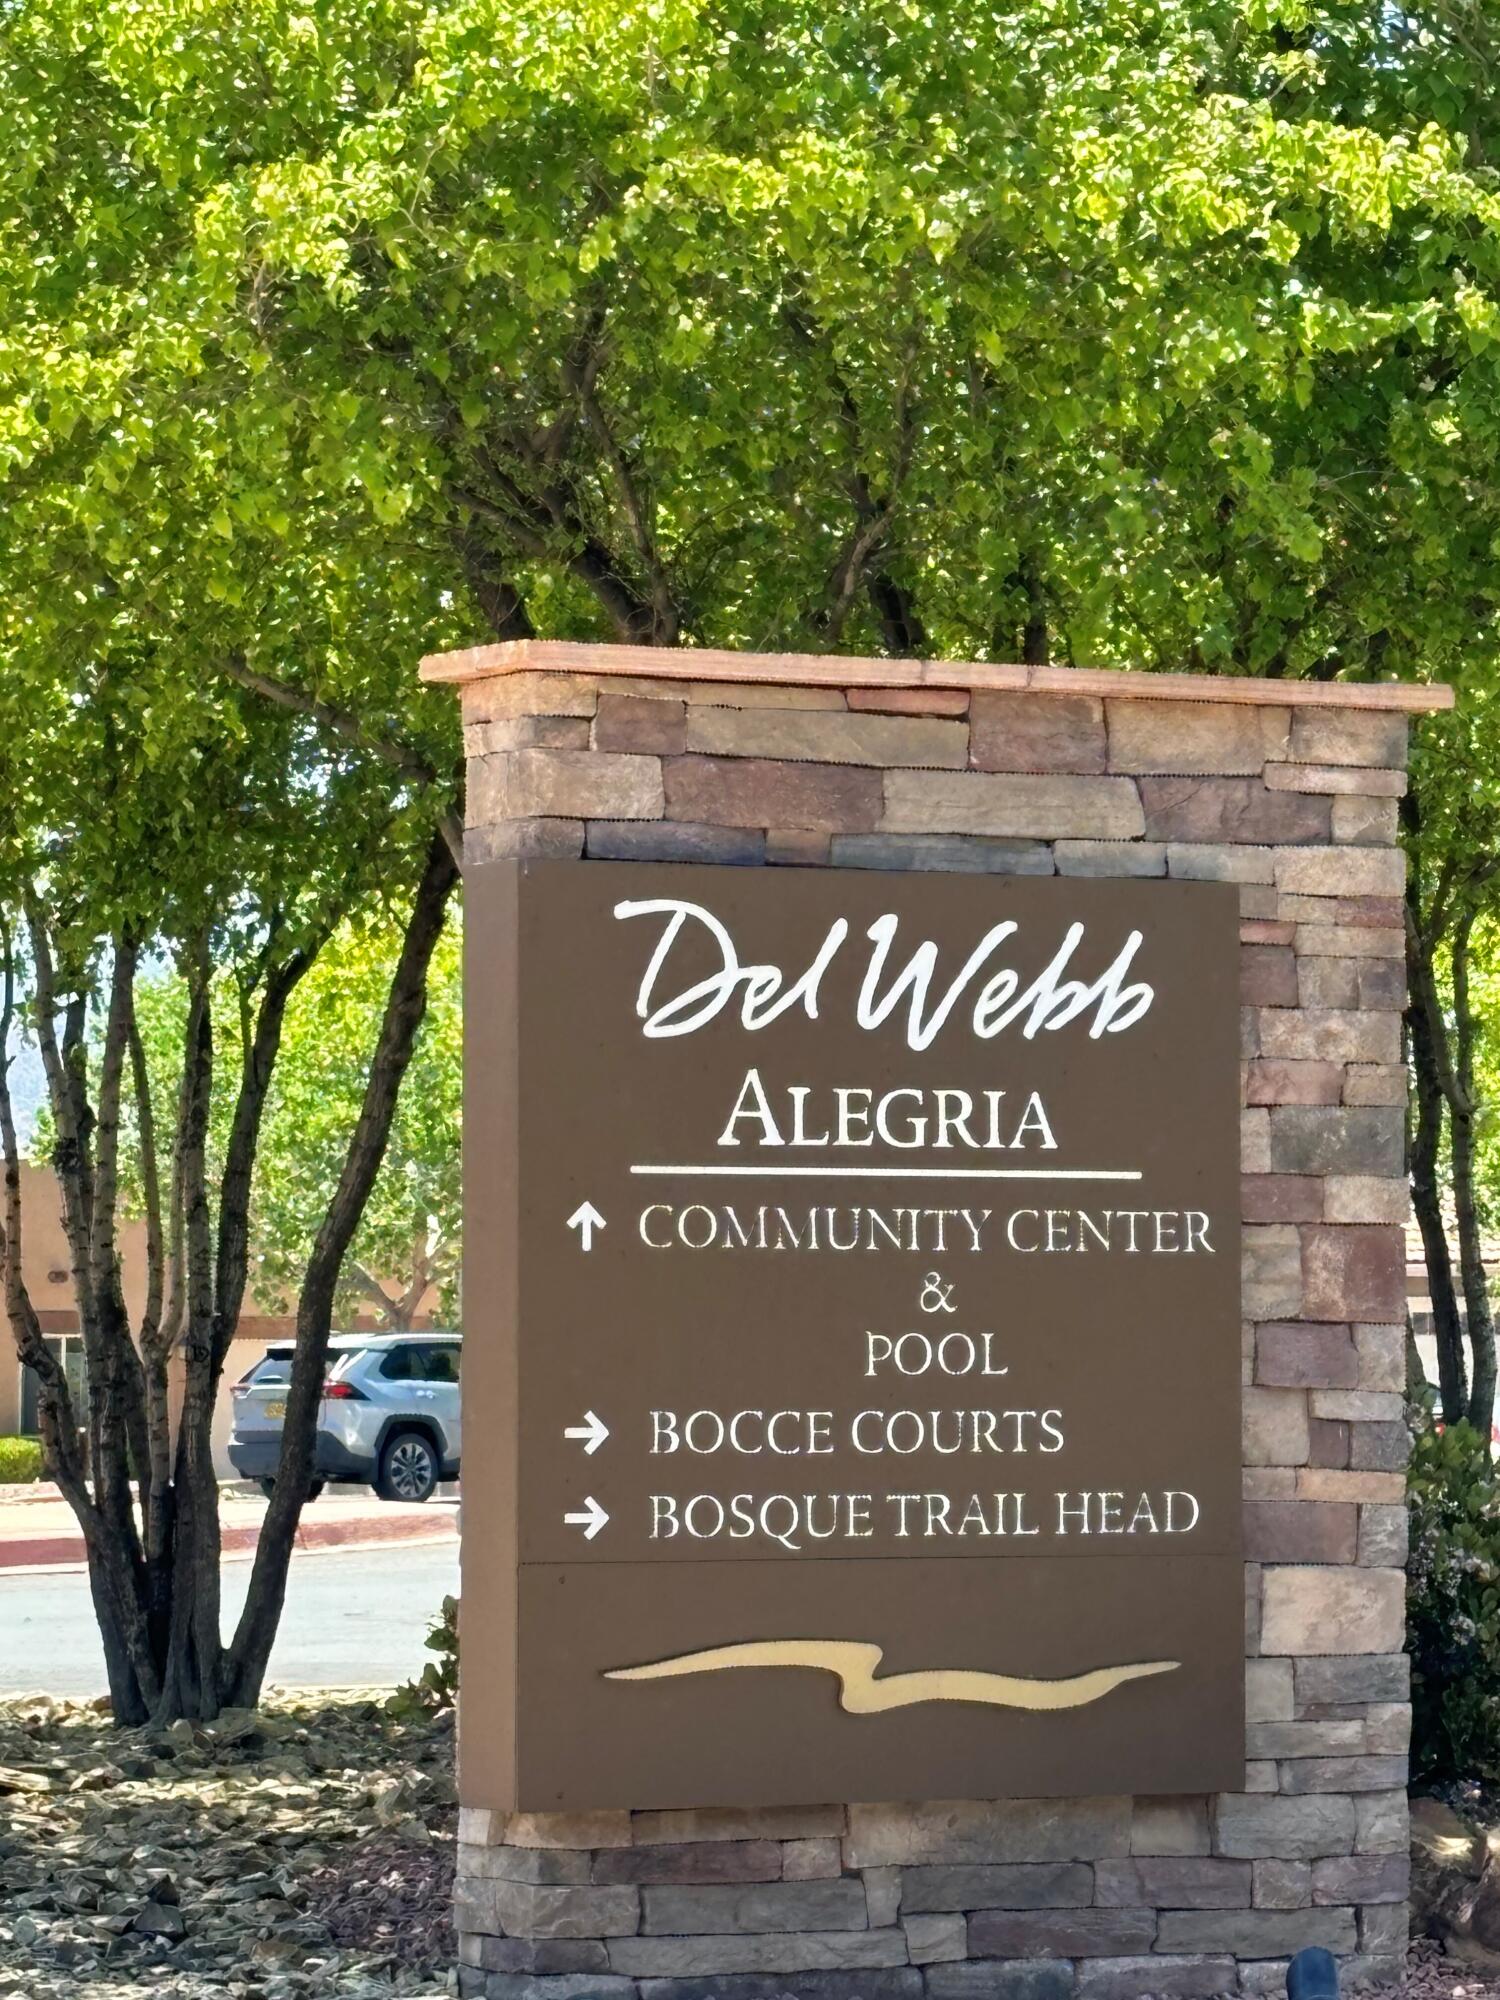 Glorious Del Webb Alegria neighborhood:   Gated planned community for 55+ in the heart of Bernalillo- this home lies near the community pool & clubhouse with a beautiful corner lot!  Wide open floorplan with huge kitchen island- lots of seating, pantry!  Fabulous flooring- large neutral tile and recent hard wood floors & carpet.  Recent hot water heater, recirculating hot water!  Super convenient to restaurants & shops.  Lovely zero-scape, easy maintenance, automatic sprinklers covered patio with gas stub for BBQ!  Faces Northeast.  Call to view this impeccably maintained home today- it wont last!$5000 seller credit for Granite or buyer closing costs and prepaids